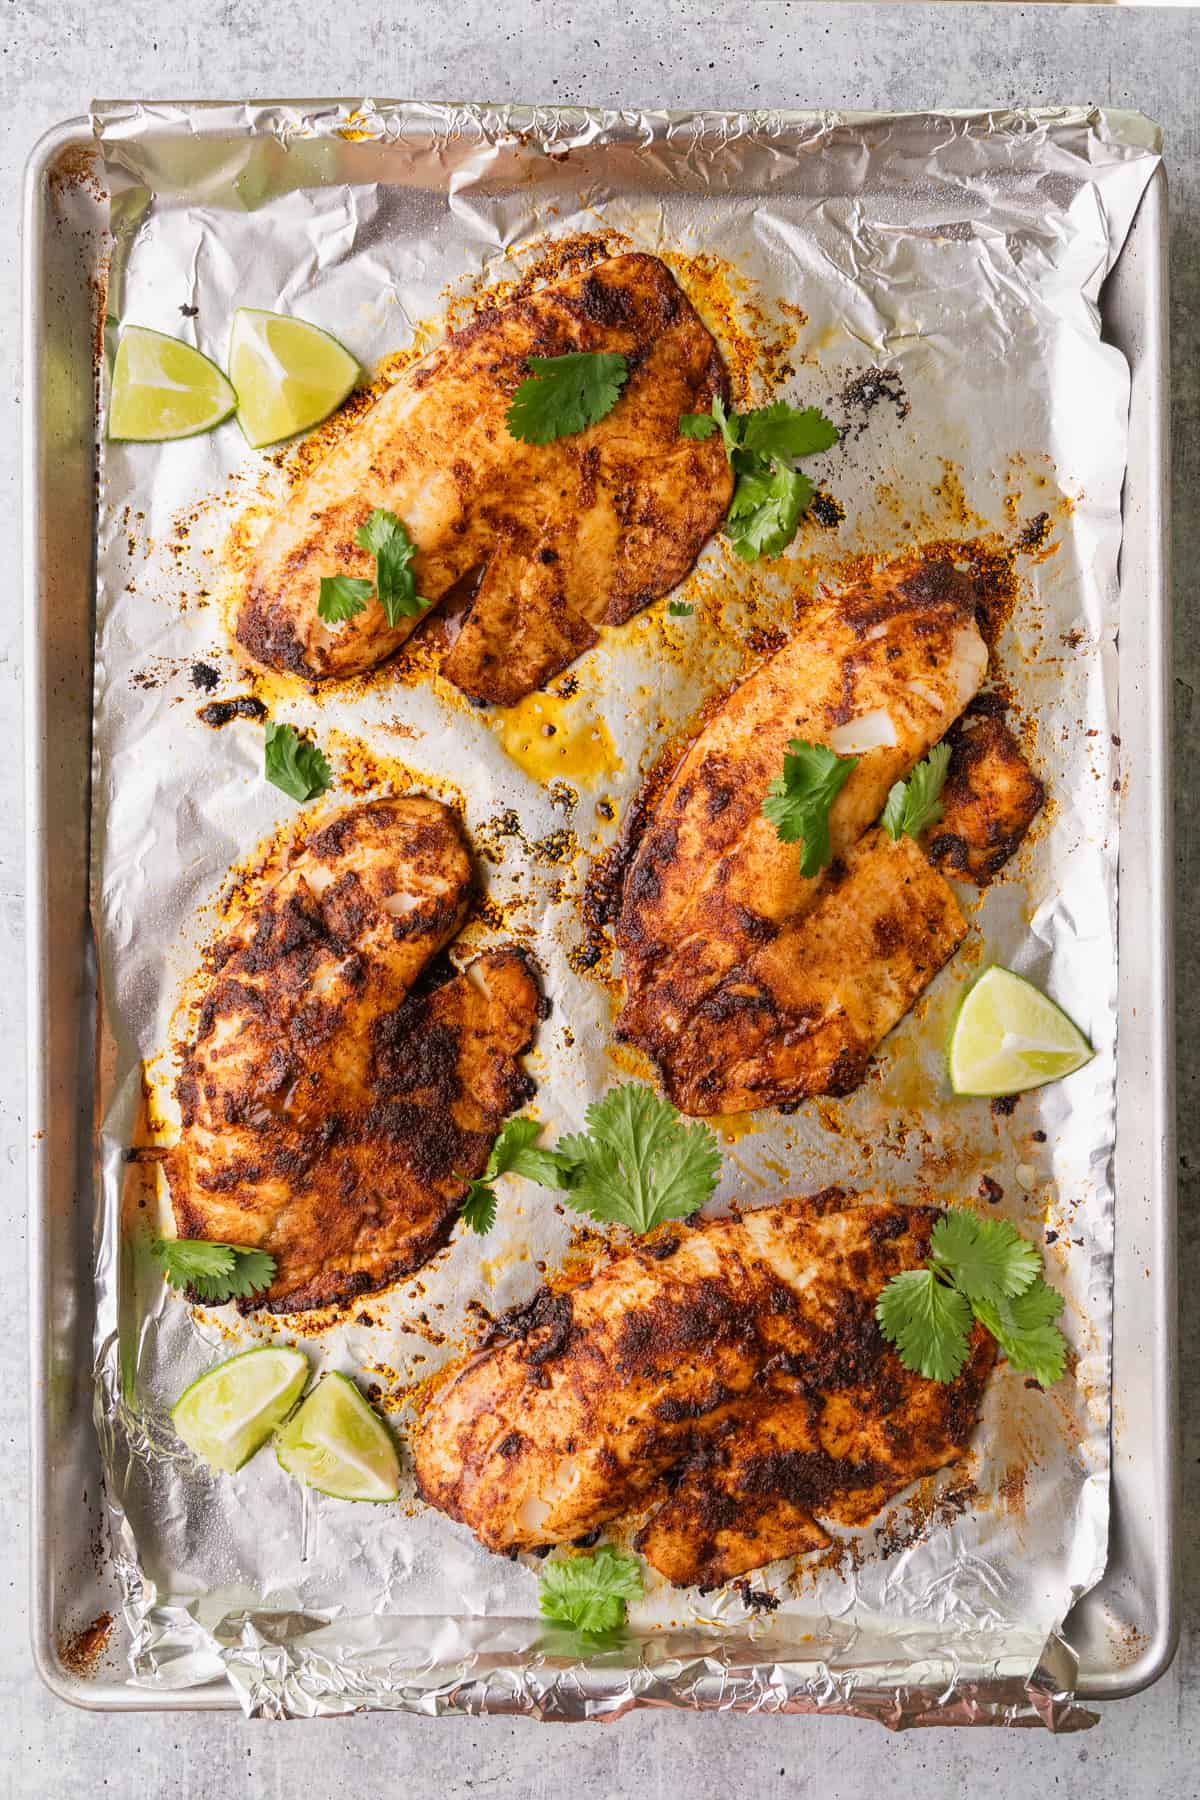 Baked blackened tilapia on a sheet pan with garnishes.